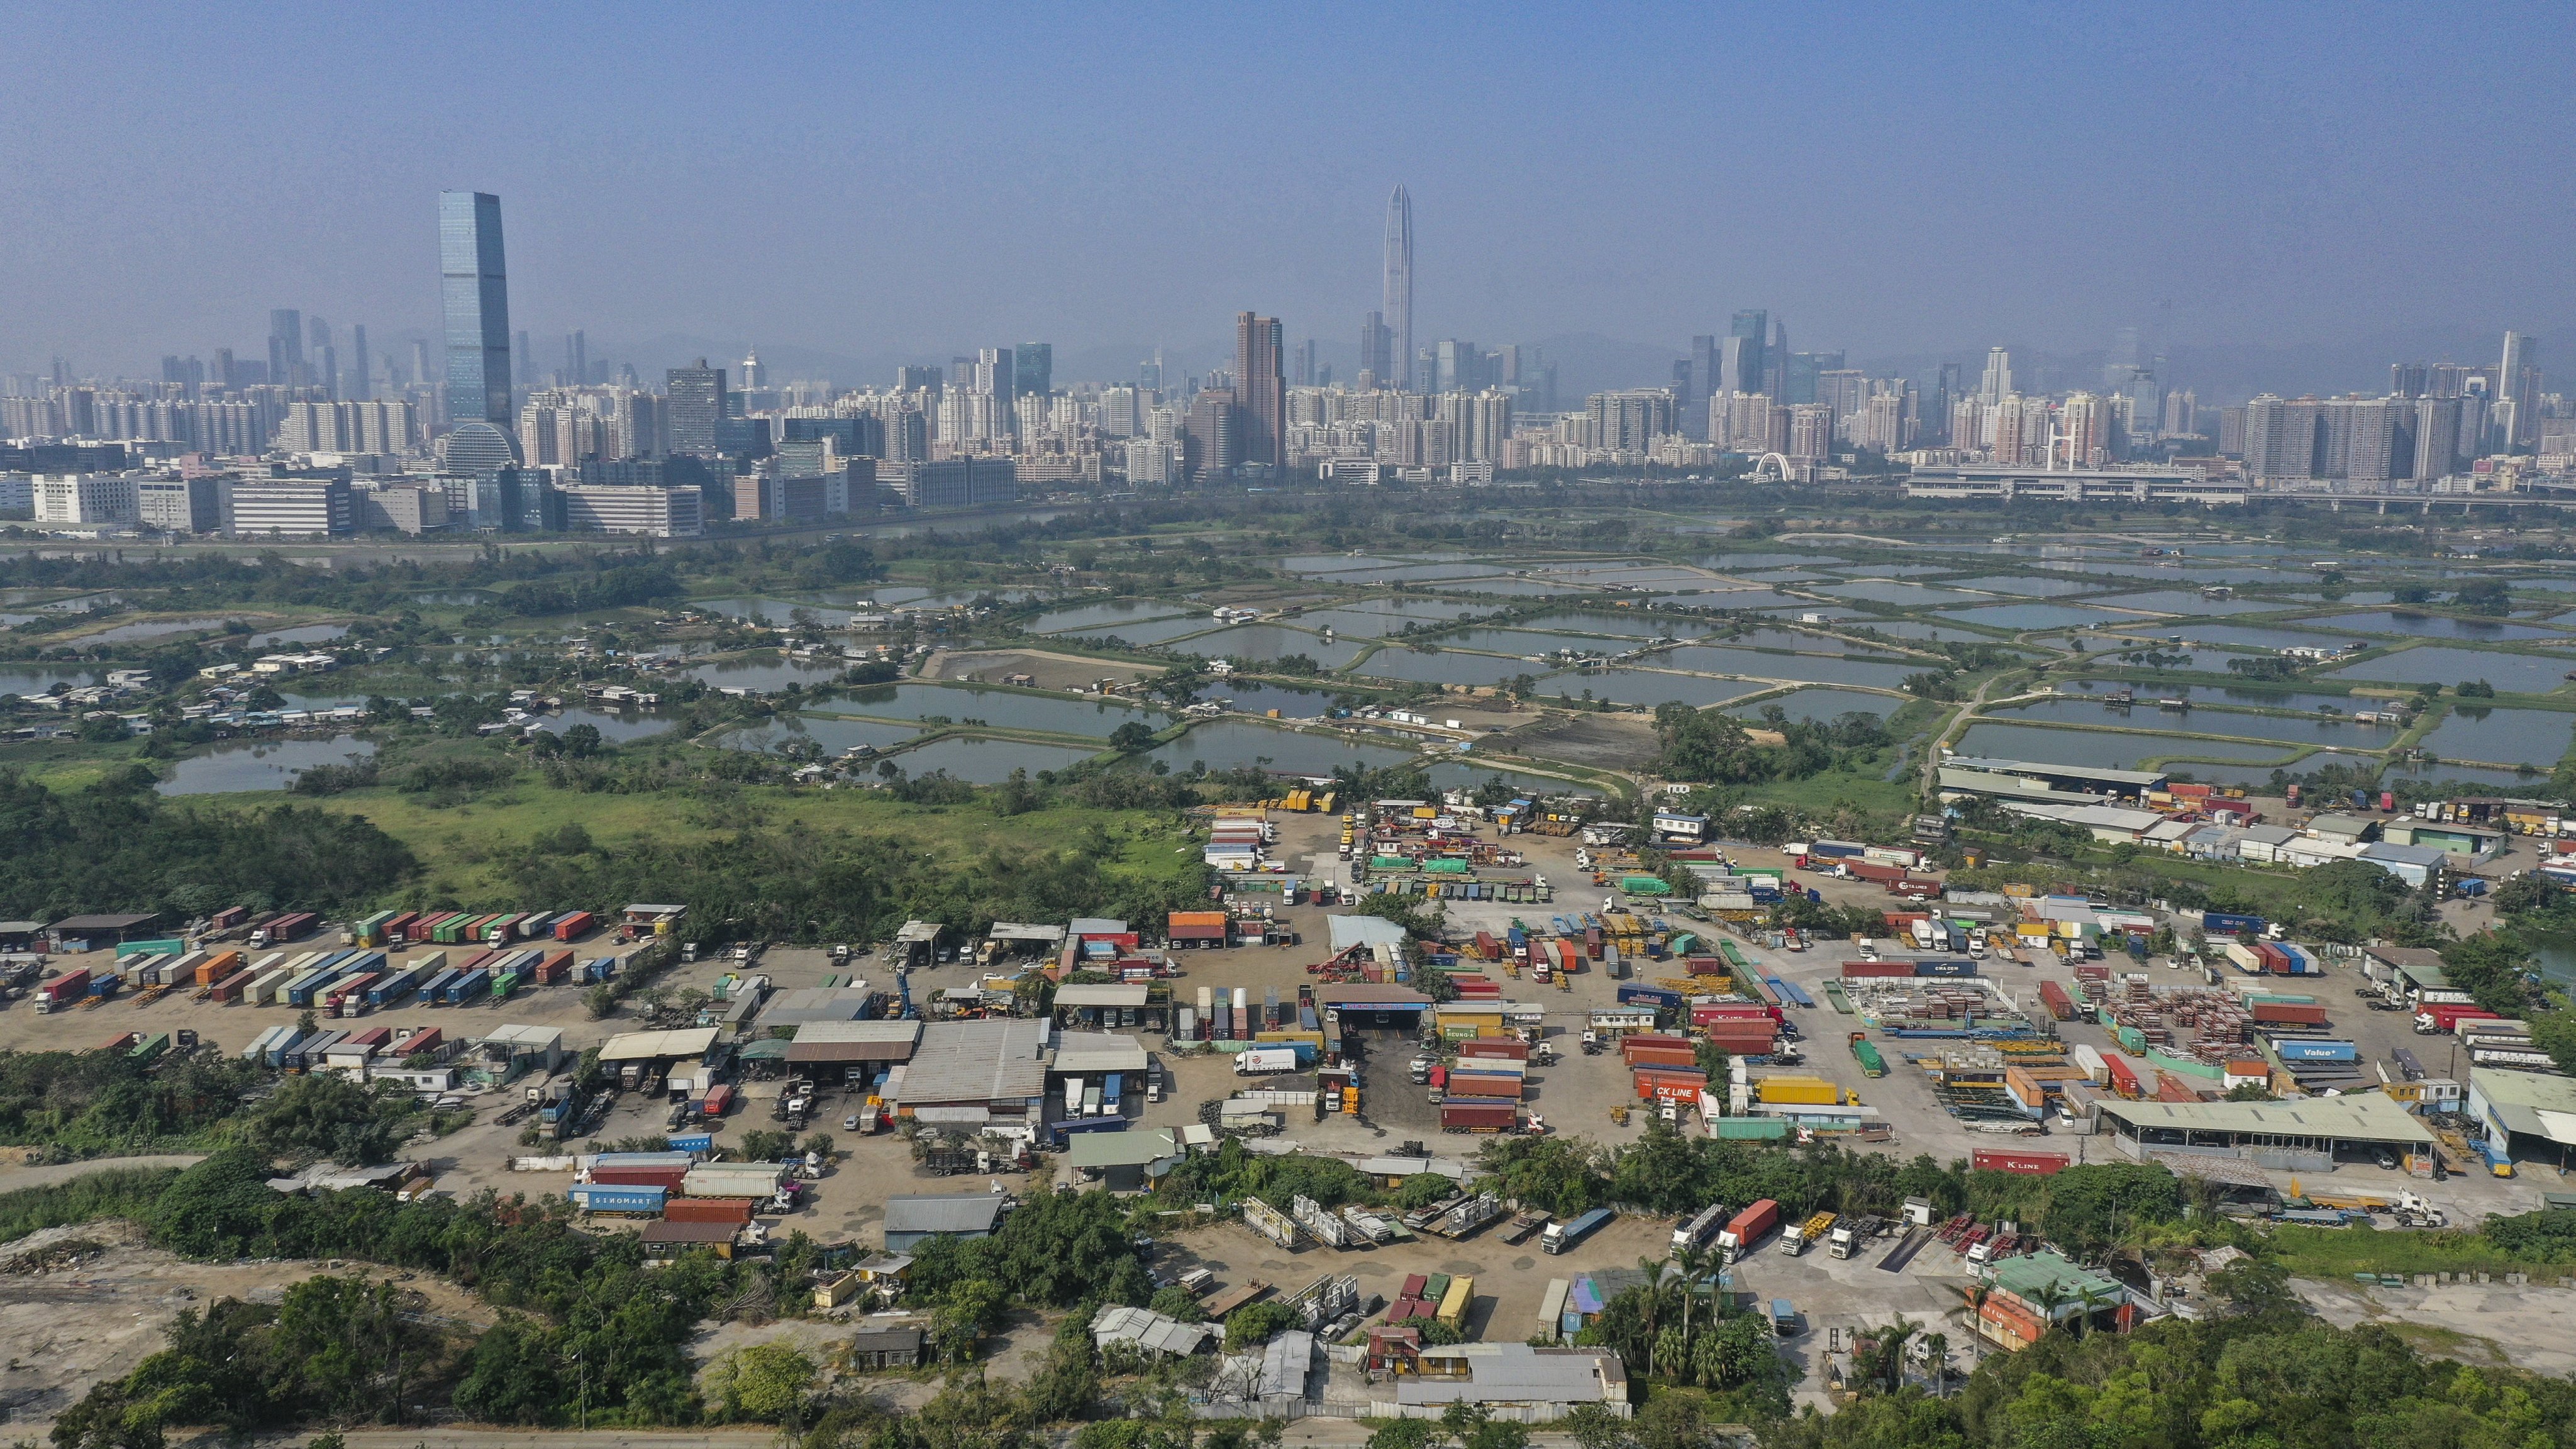 A view of rural land in northern Hong Kong, with Shenzhen in the background. Photo: Roy Issa